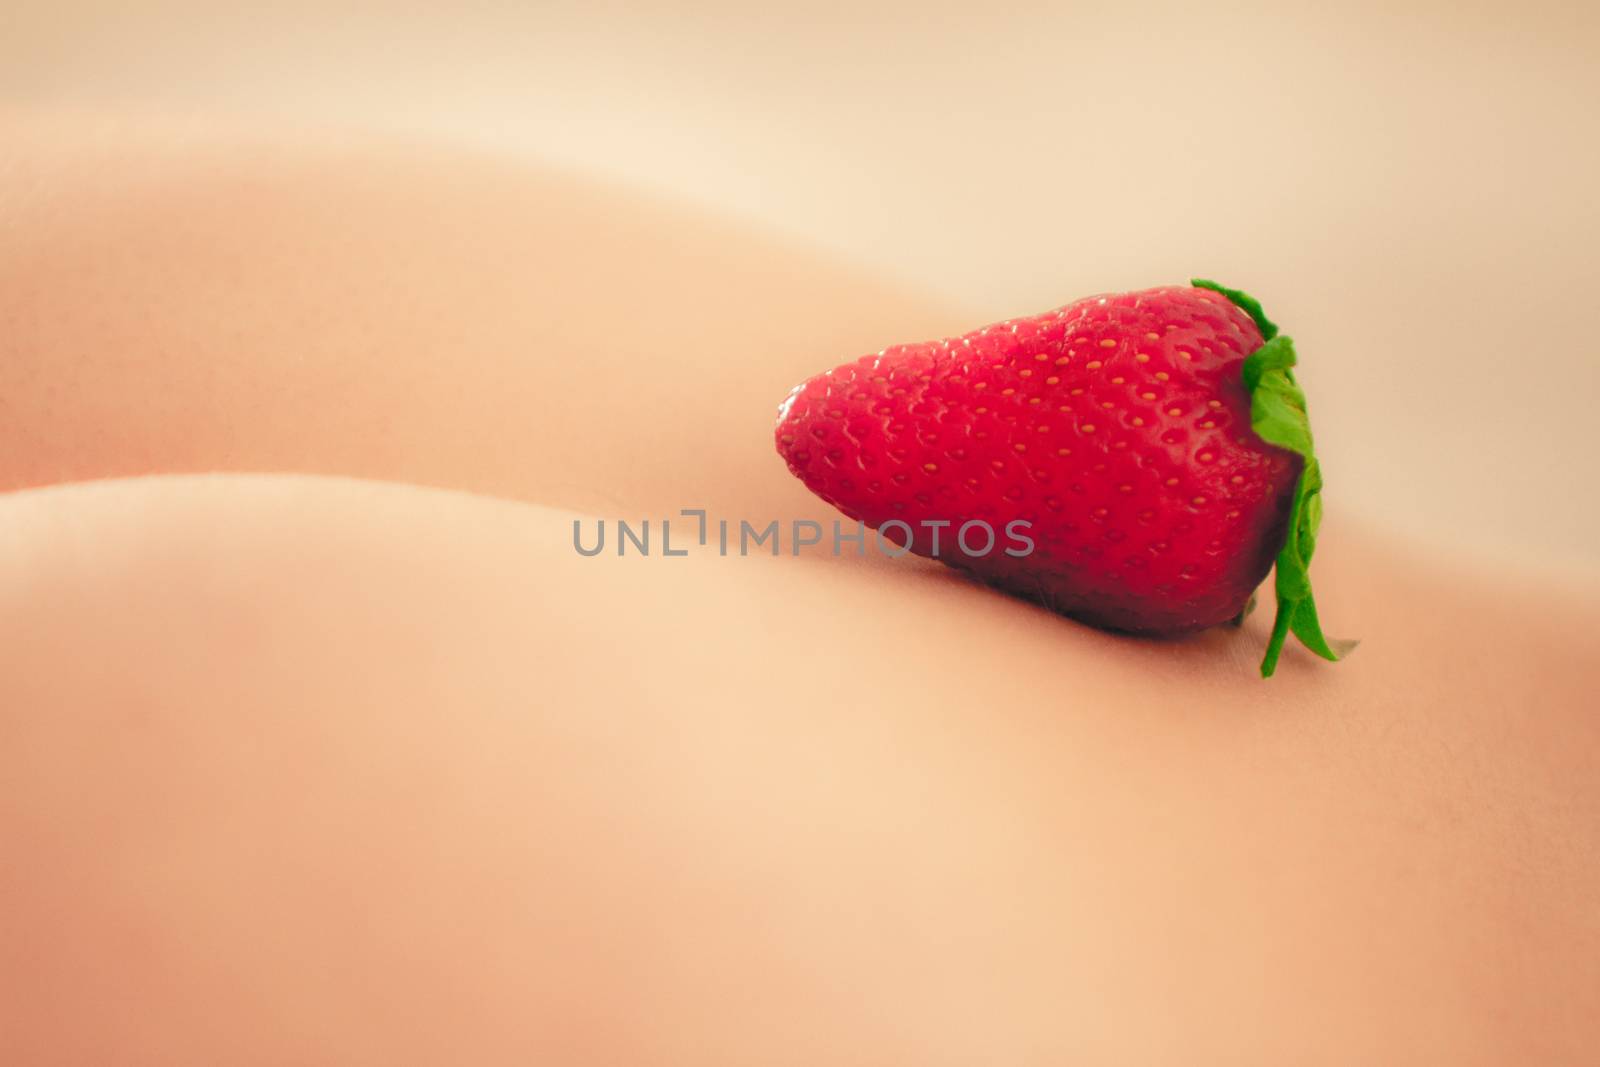 Inviting sexy back of a girl with a resting strawberry indicating the attachment of pinkish buttocks by robbyfontanesi